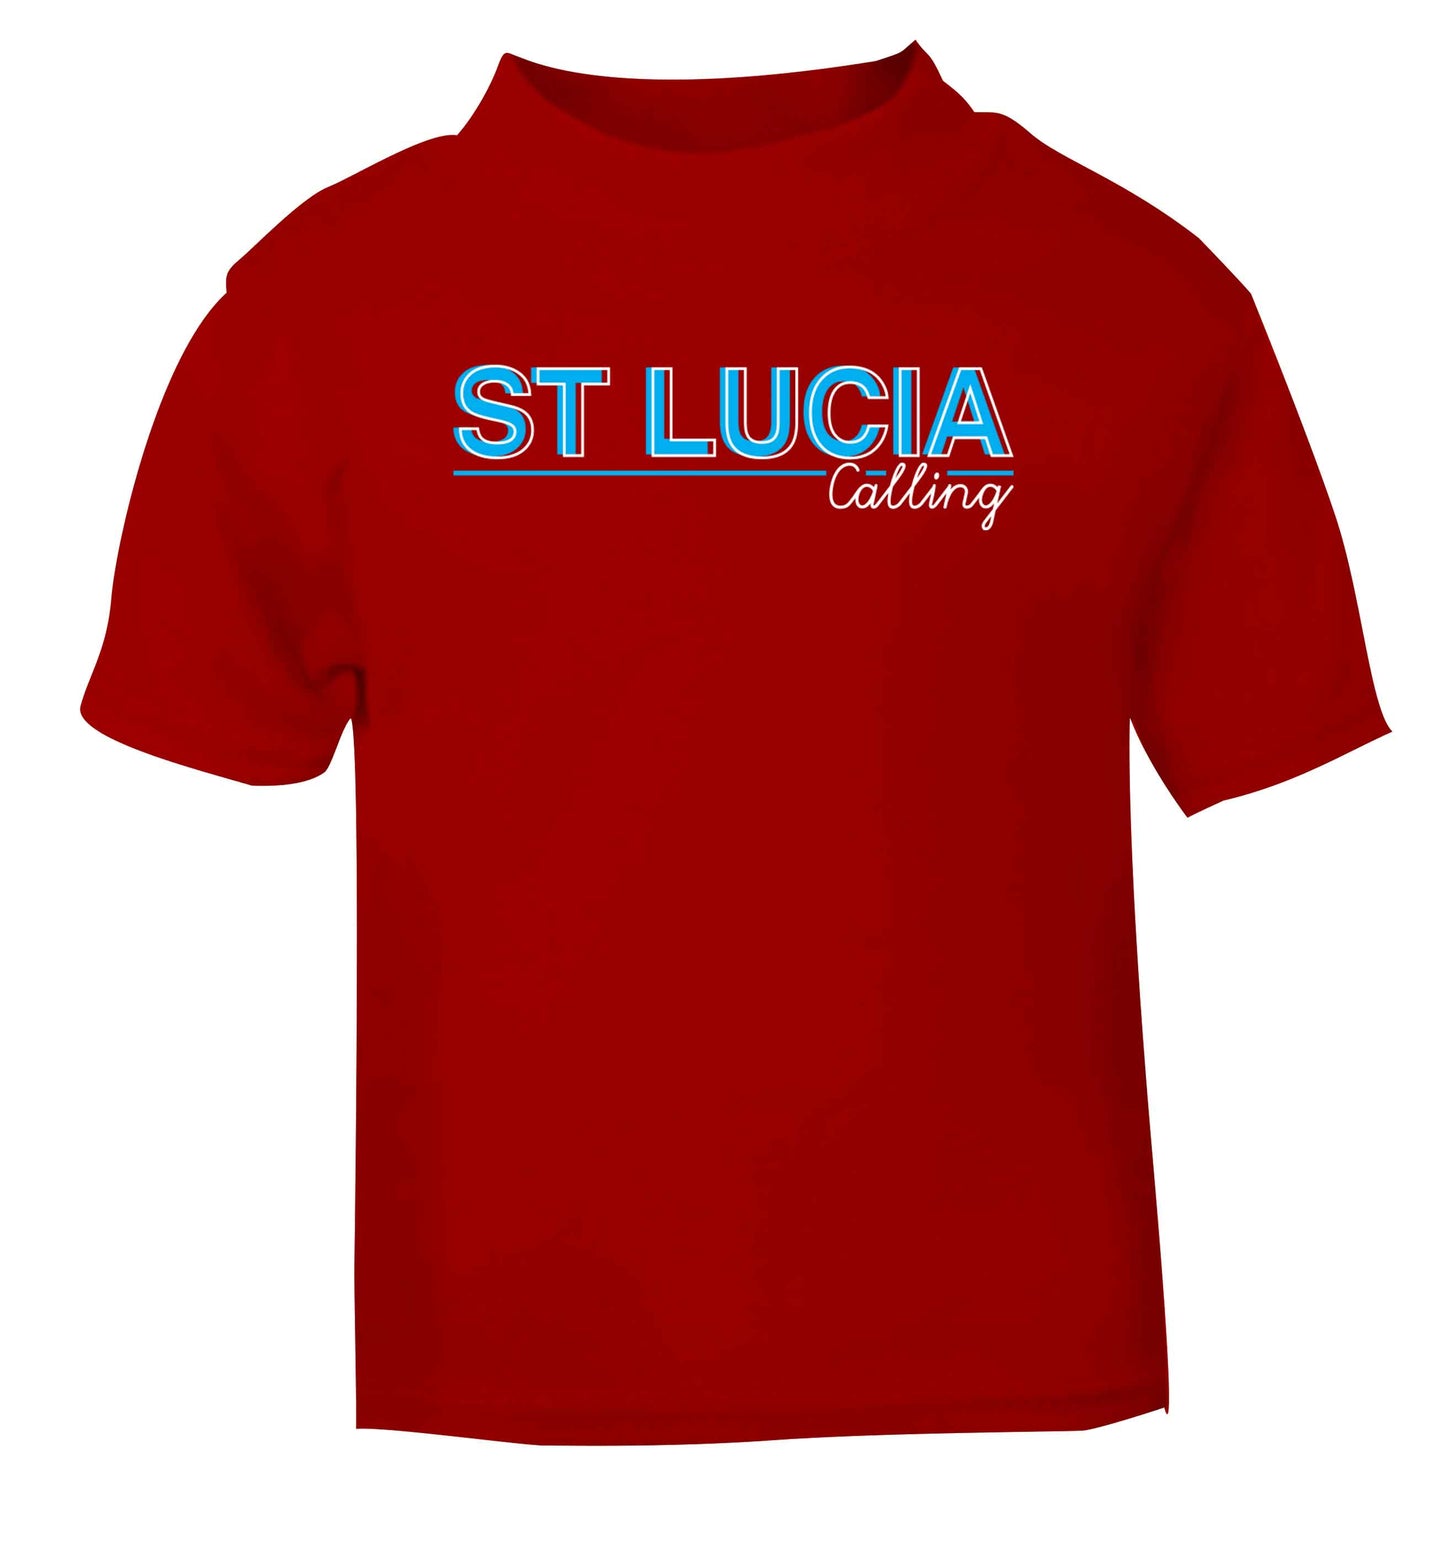 St Lucia calling red Baby Toddler Tshirt 2 Years